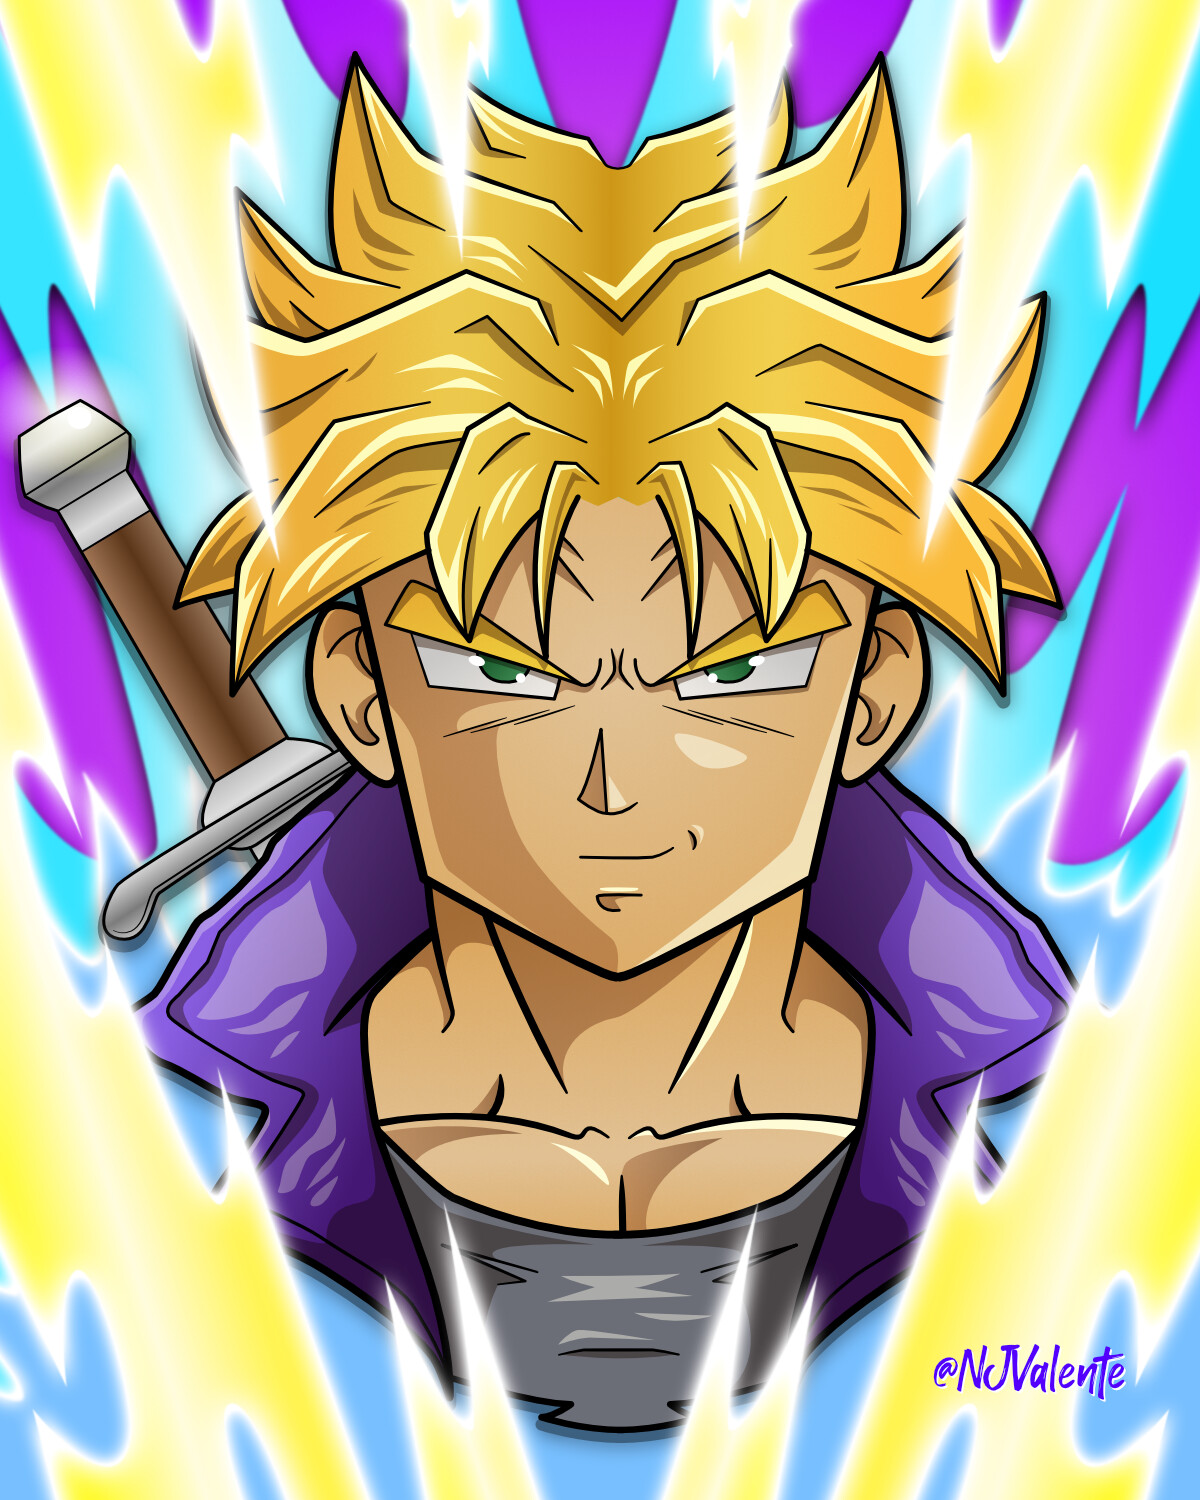 423499 Trunks (character), trunks, video game art, future trunks, Dragon  Ball Z, Tien Shinhan, Piccolo, Dragon Ball Super, Dragon Ball Xenoverse 2,  anime, Dragon Ball - Rare Gallery HD Wallpapers